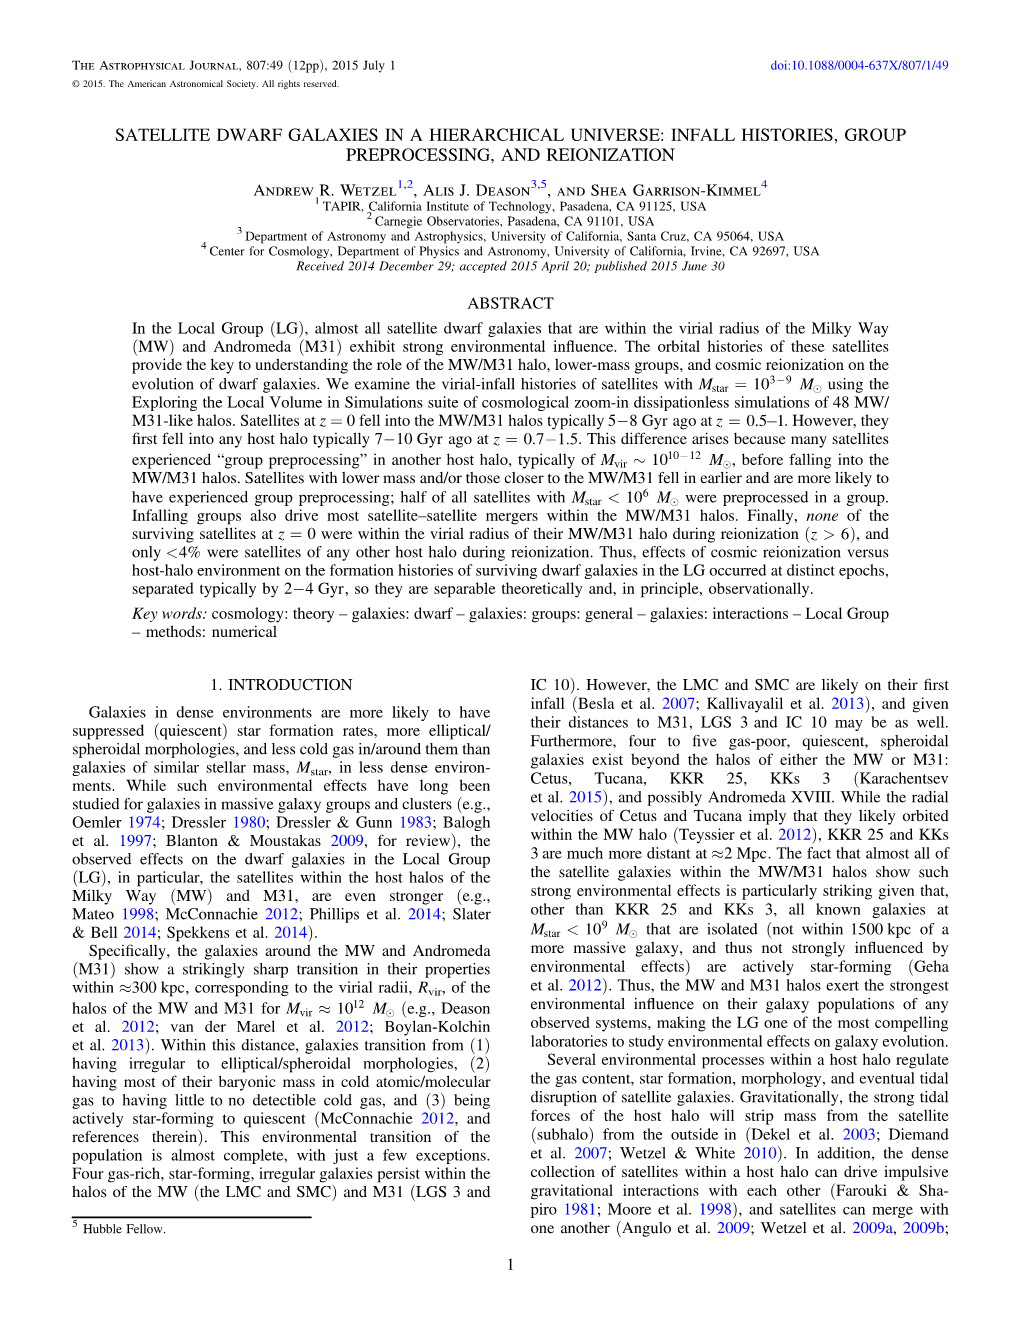 SATELLITE DWARF GALAXIES in a HIERARCHICAL UNIVERSE: INFALL HISTORIES, GROUP PREPROCESSING, and REIONIZATION Andrew R